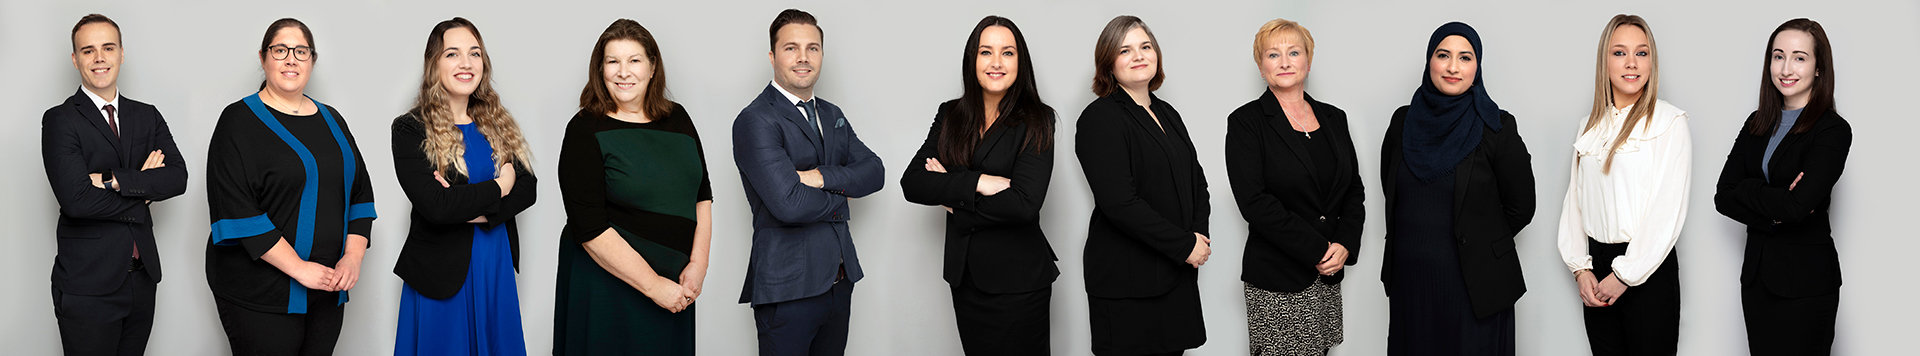 Wills and Probate Team